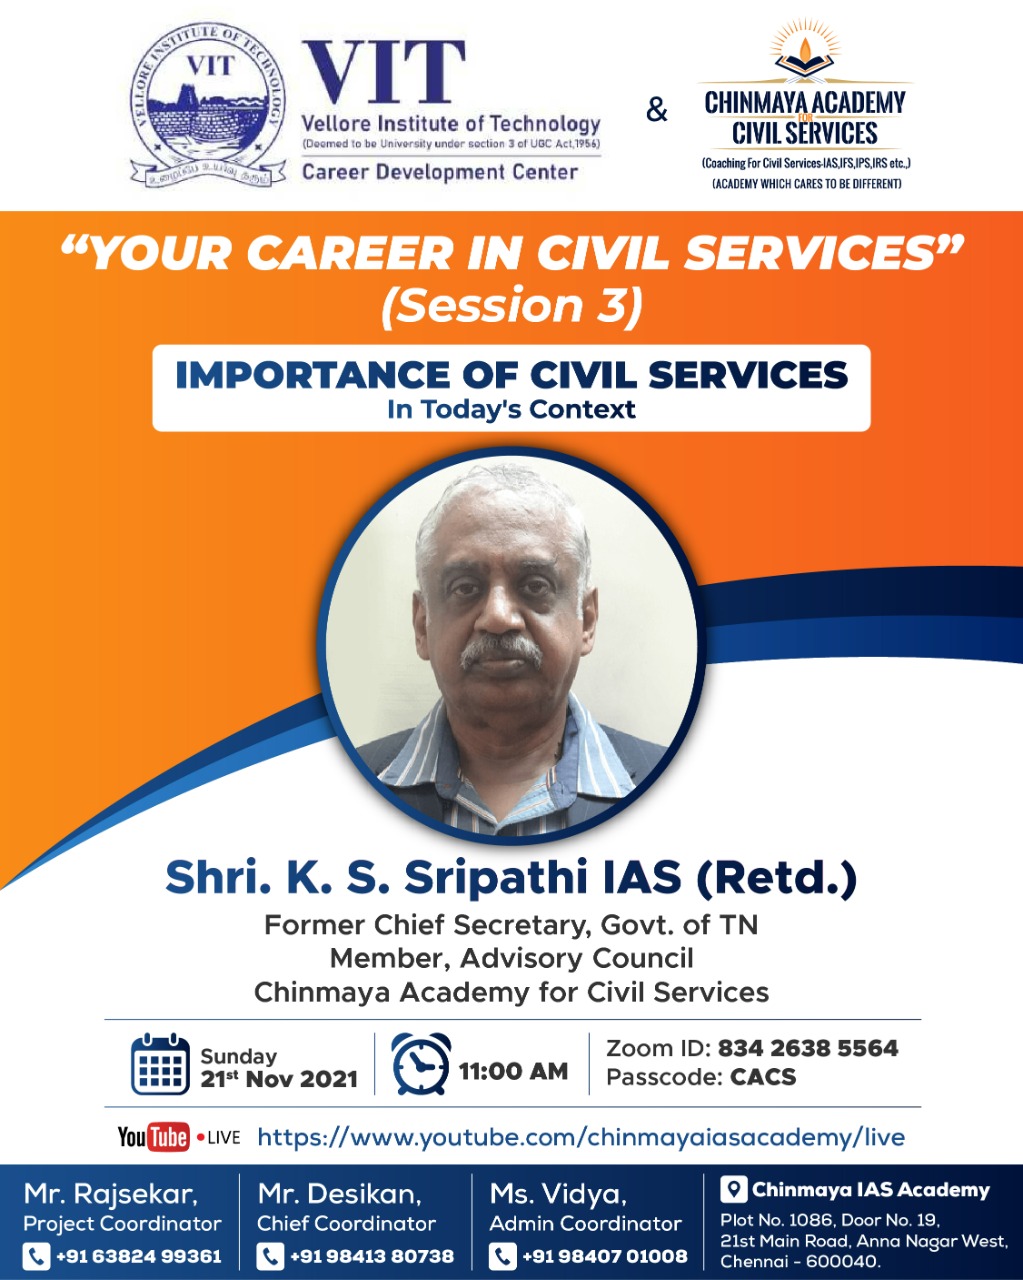 poster about the session on the importance of civil services in today's context